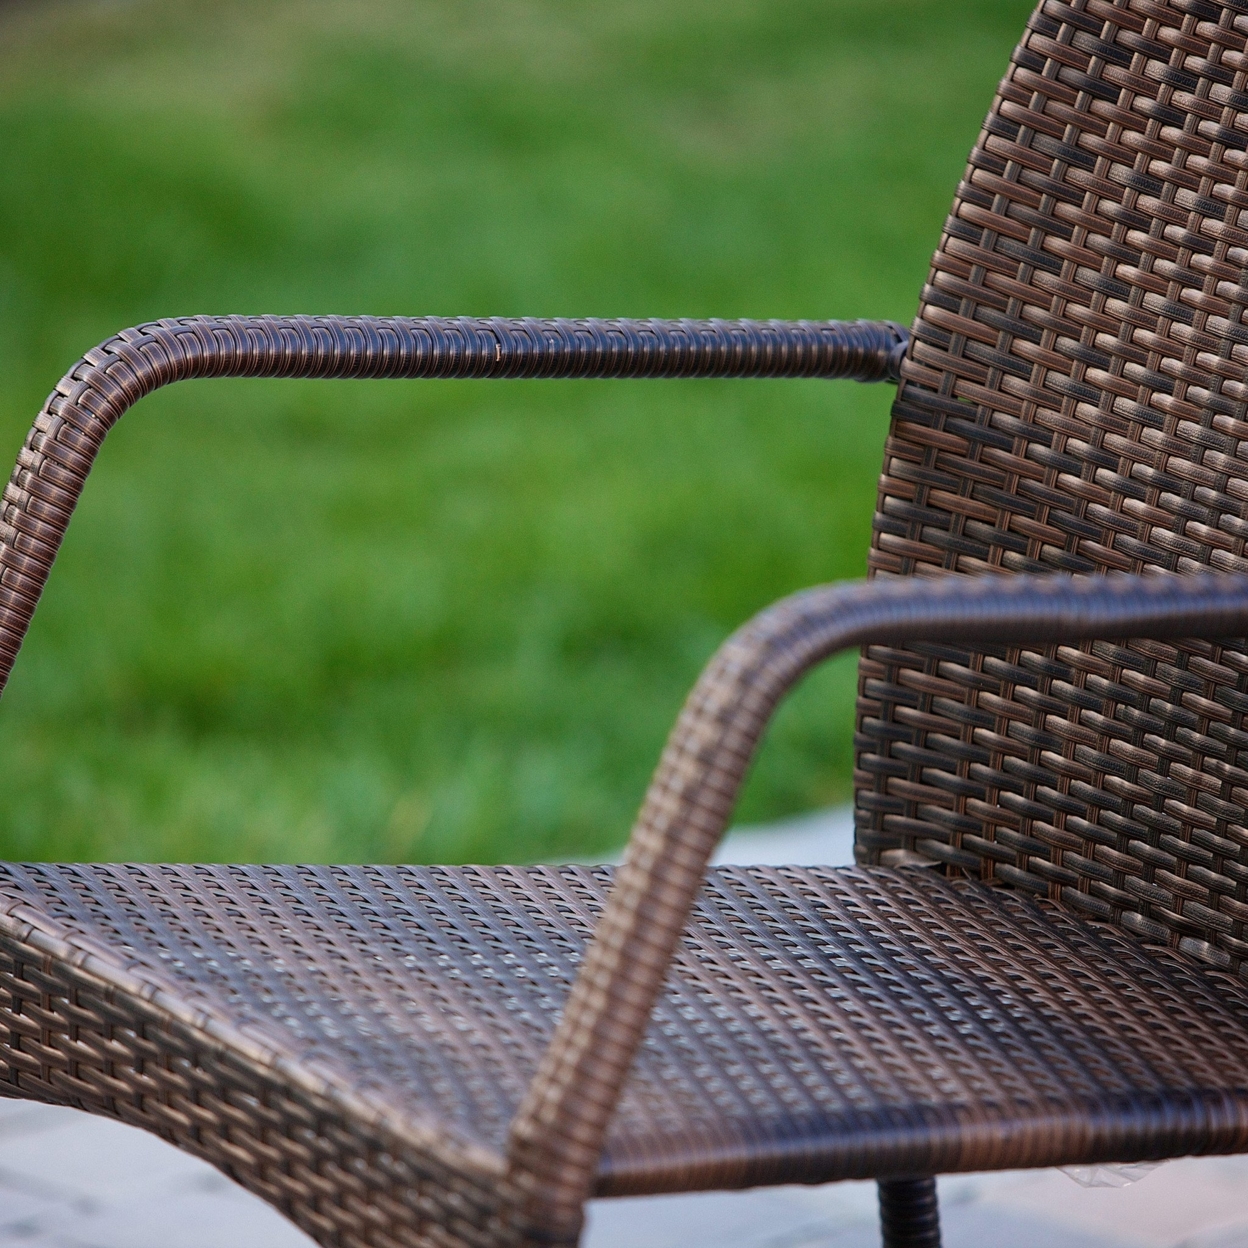 Michael Outdoor Wicker Chairs (Set Of 2)